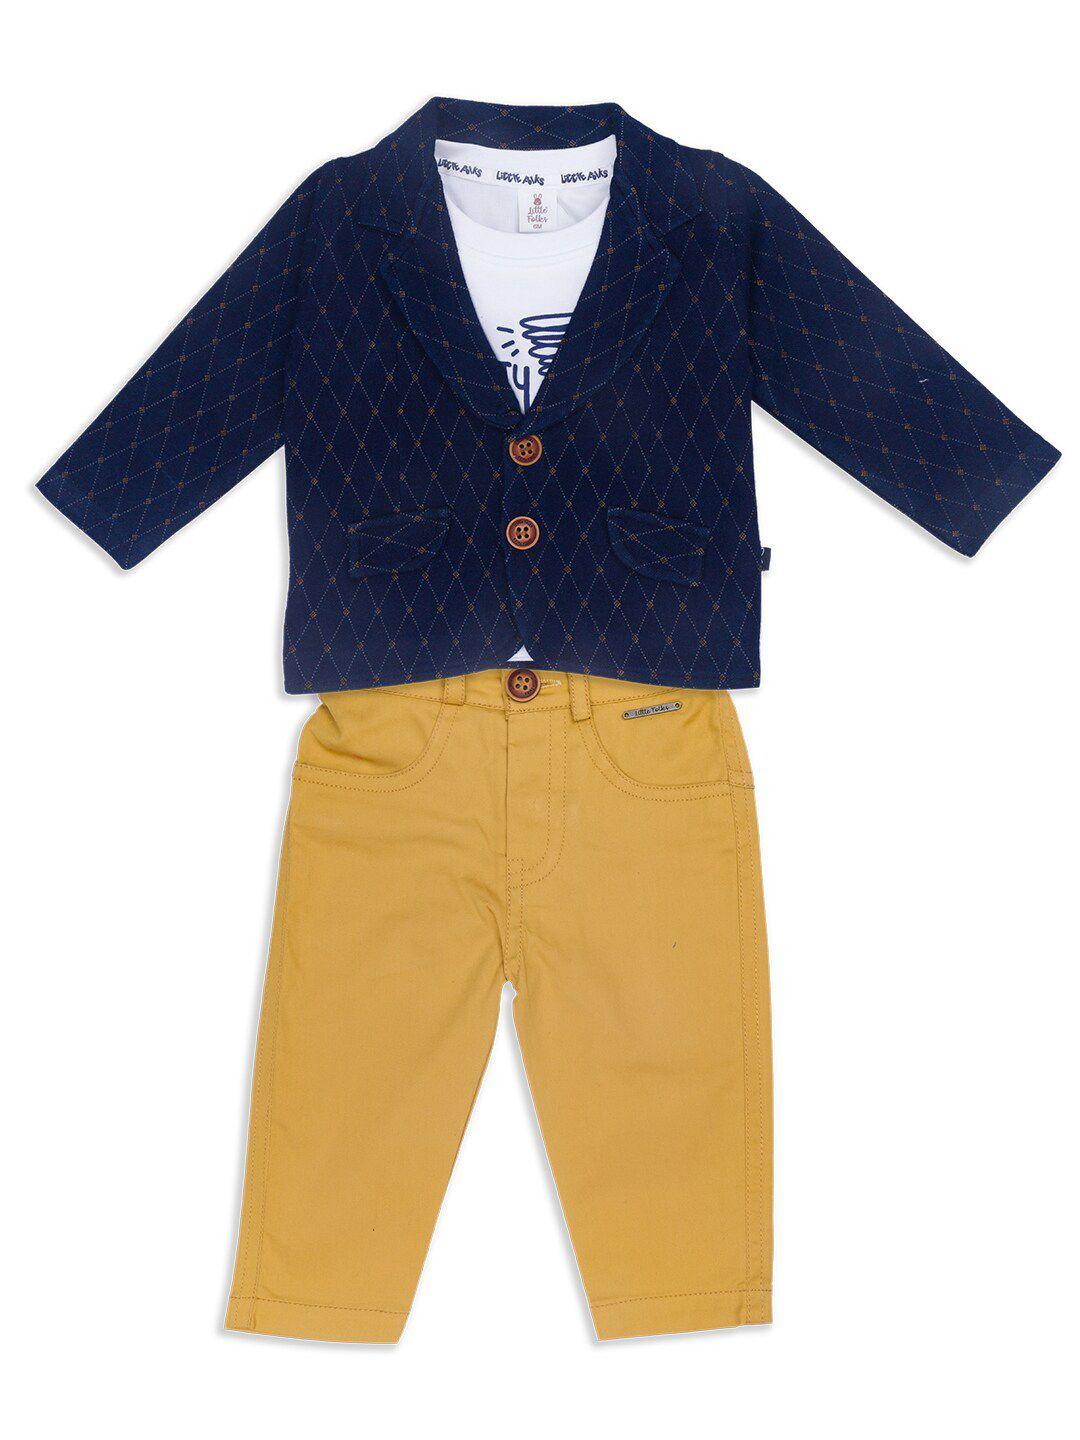 little folks unisex kids navy blue & mustard printed t-shirt with trousers & jacket